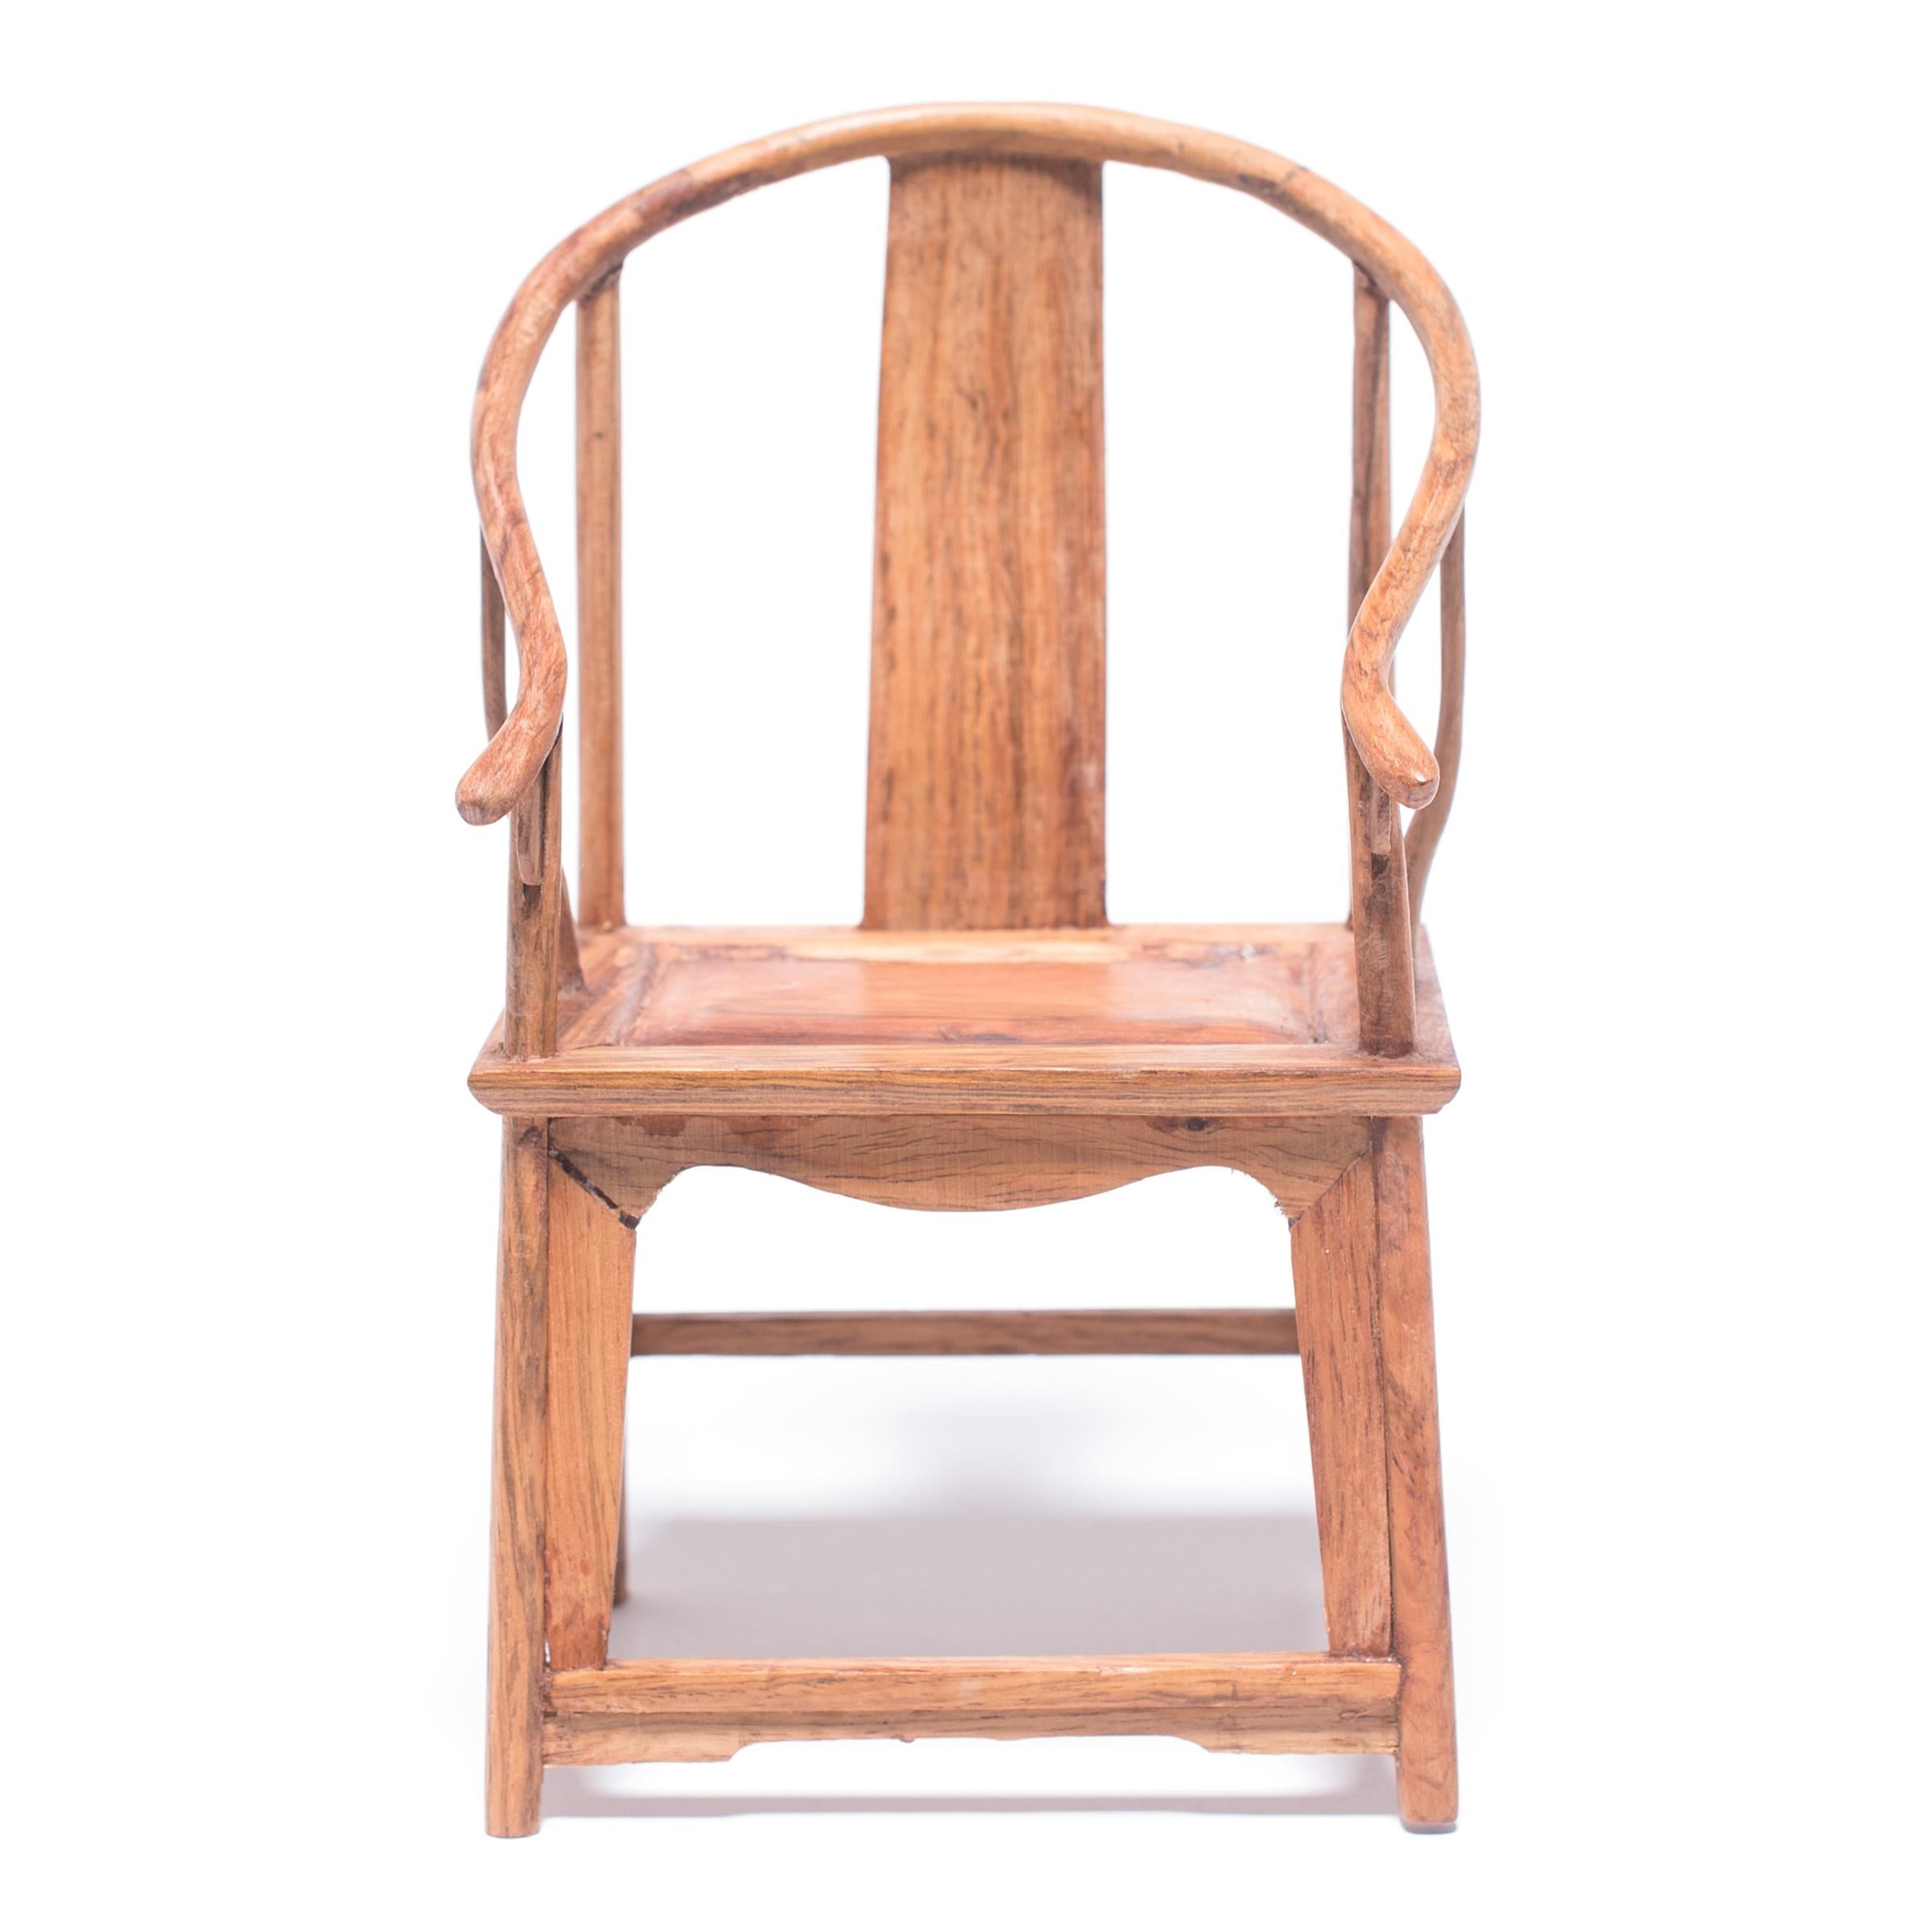 A full size set of chairs and table crafted with this level of workmanship would be an incredible find, but this beautiful furniture set—at only six inches tall—is perfectly constructed down to the tiniest minutia. The set was made in northern China